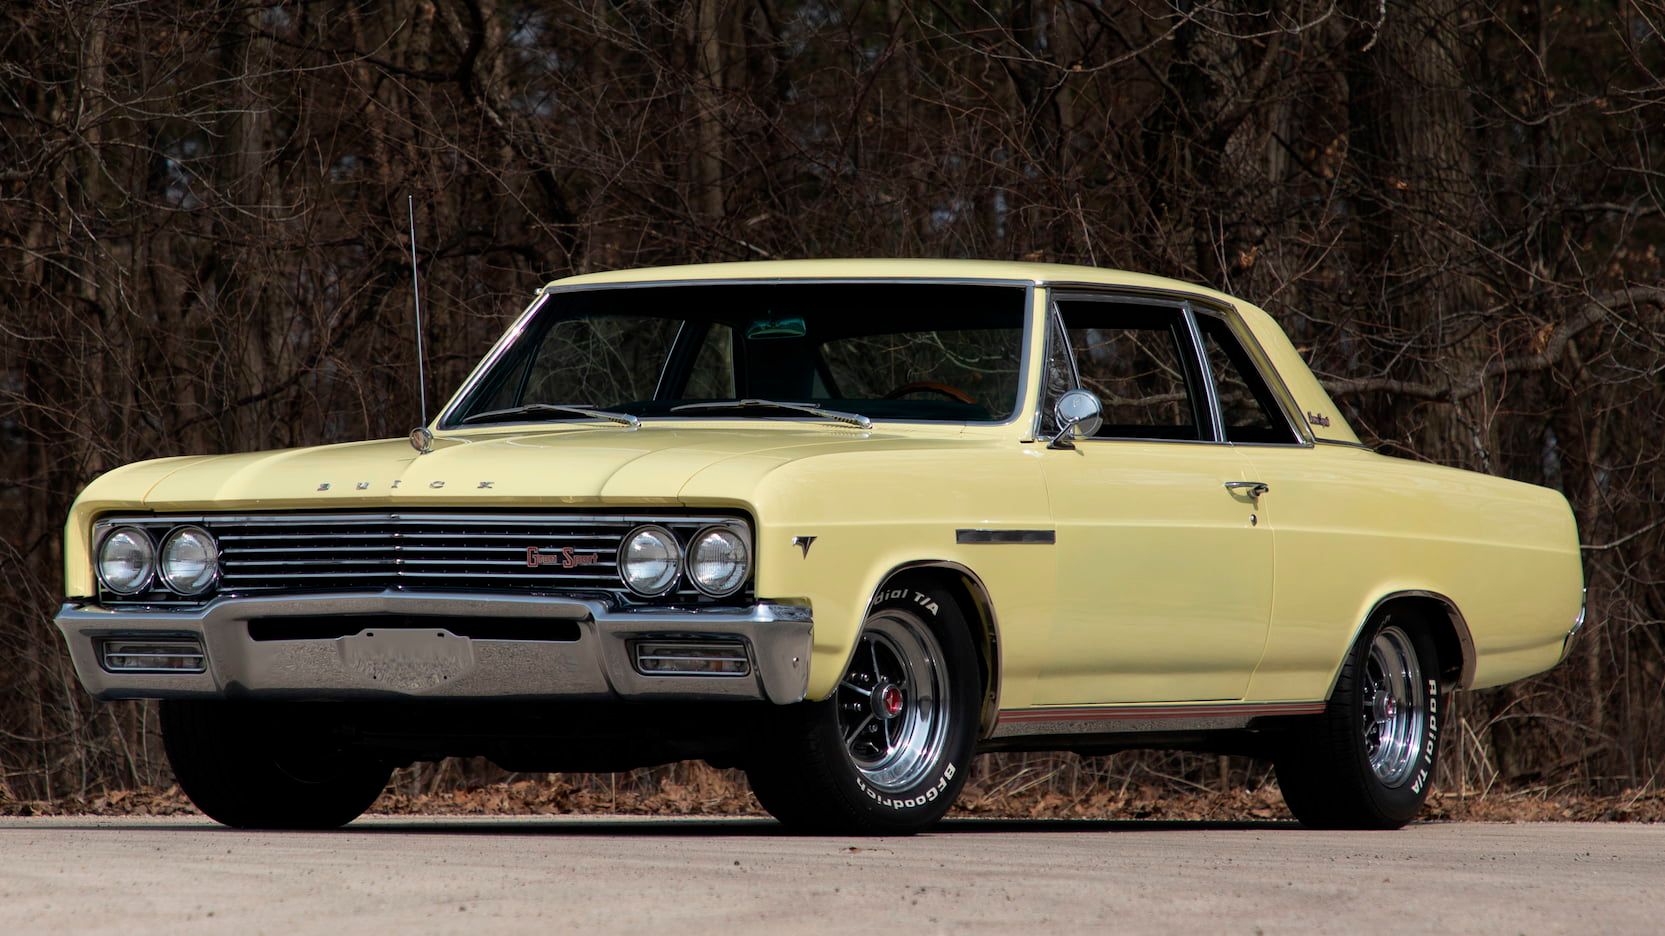 1965 Buick Skylark: The muscle car that had style.